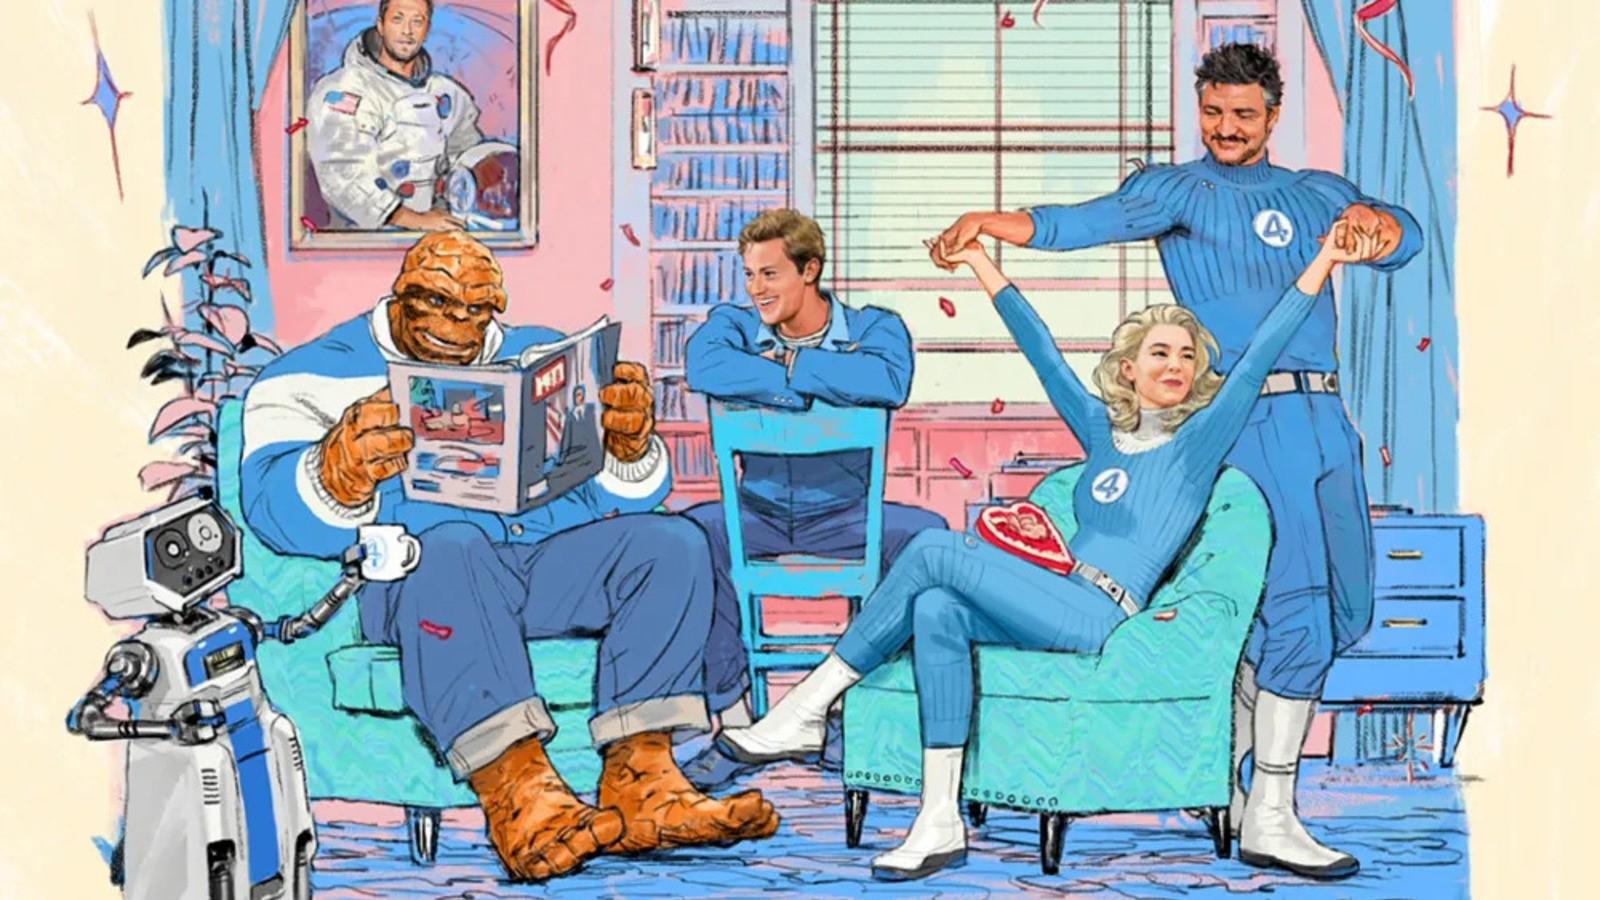 Fantastic Four cartoon released by Marvel